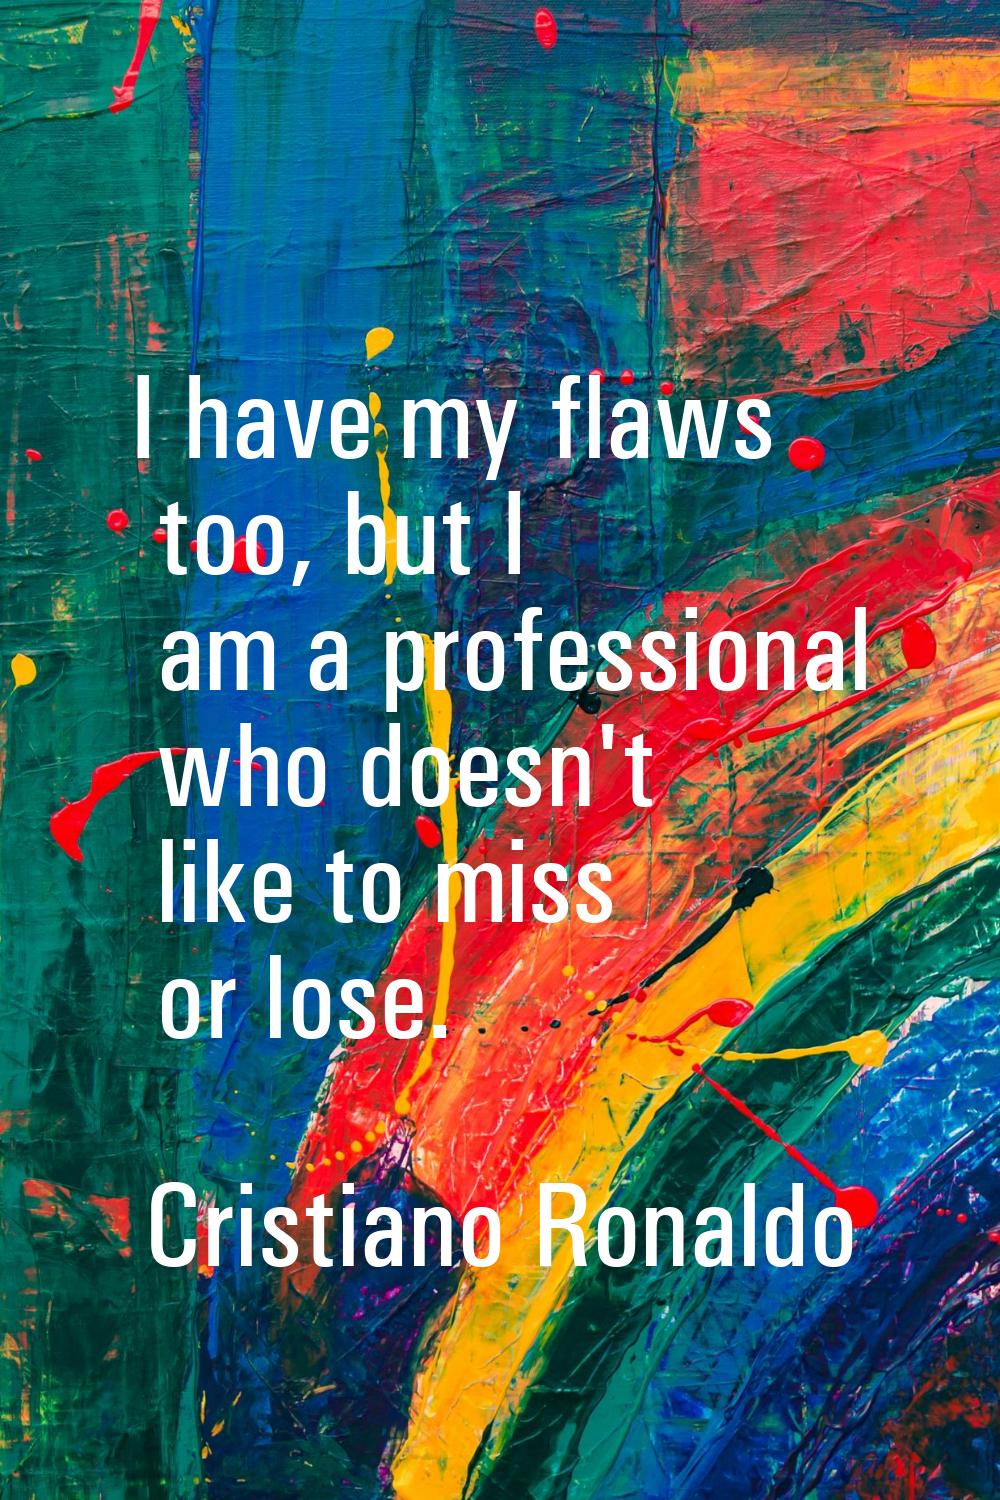 I have my flaws too, but I am a professional who doesn't like to miss or lose.